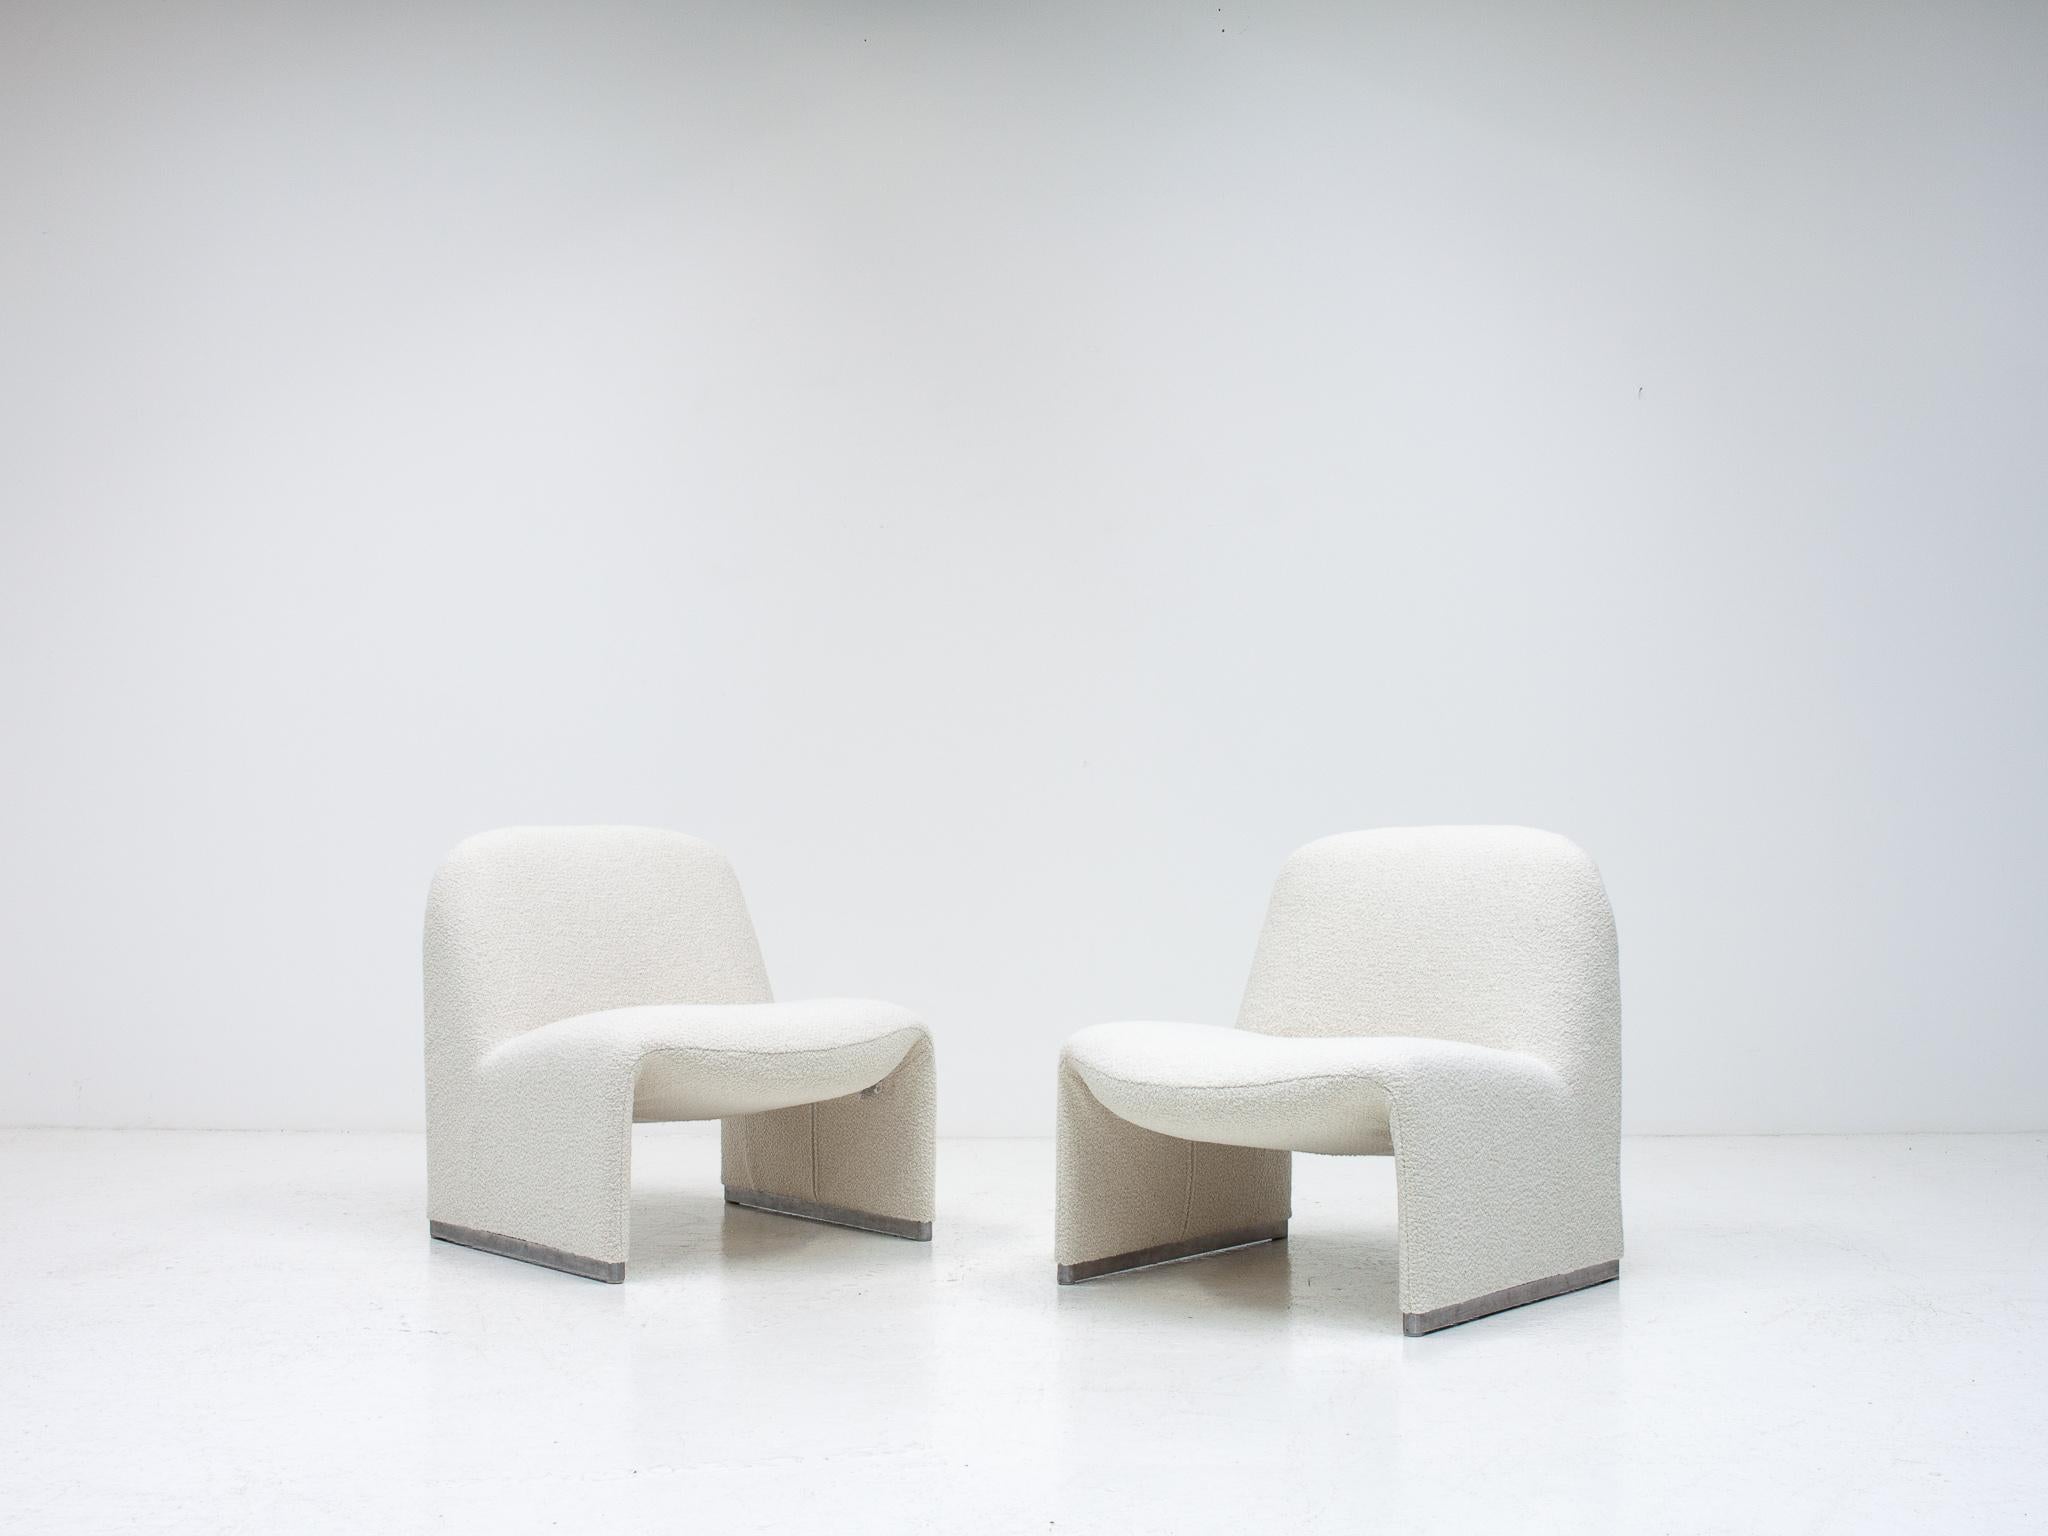 20th Century Giancarlo Piretti “Alky” Chairs In Yarn Collective bouclé *Customizable* For Sale